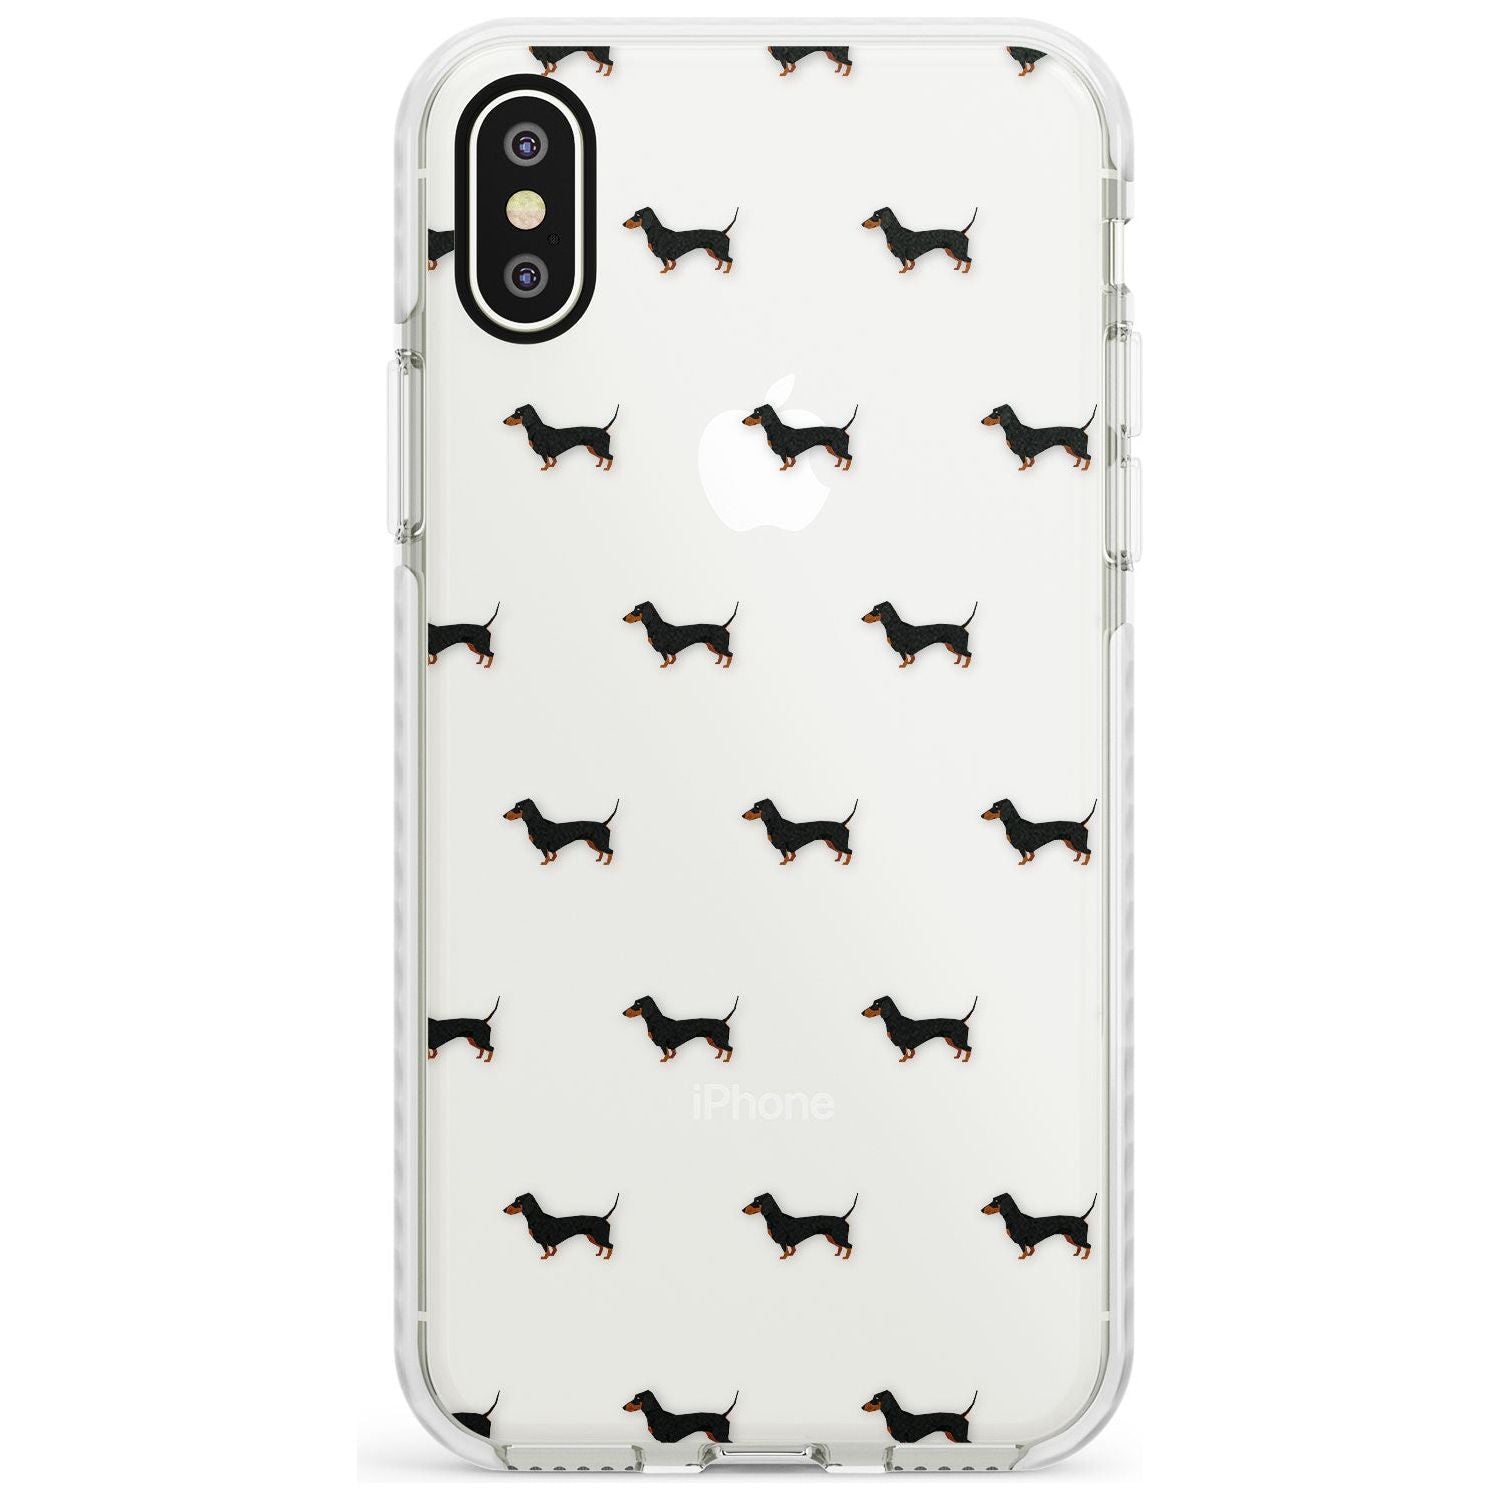 Dachshund Dog Pattern Clear Impact Phone Case for iPhone X XS Max XR